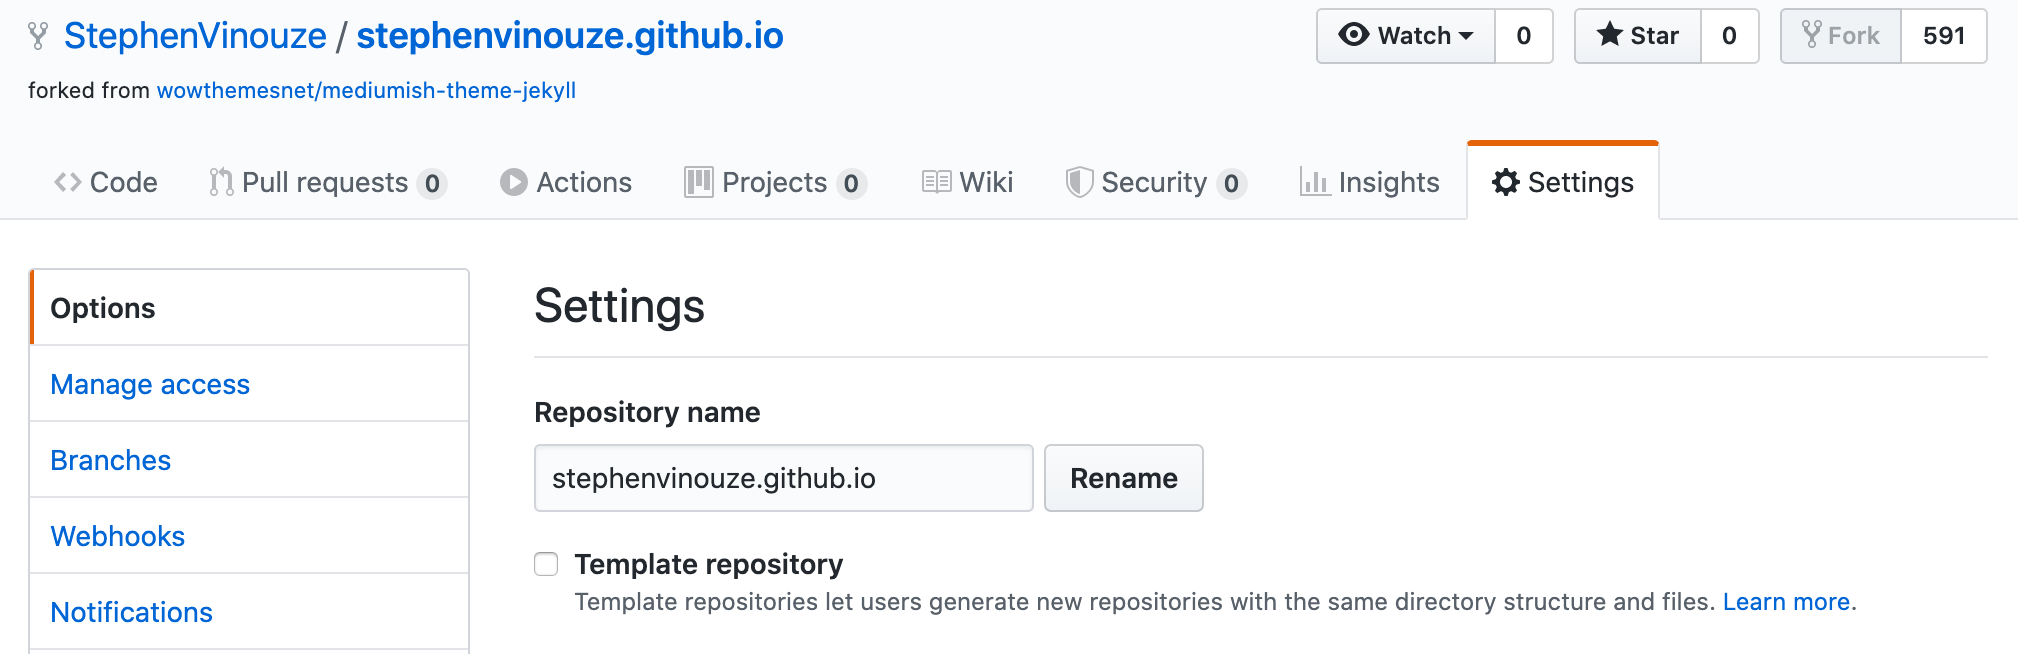 I edited my forked repository’s name to `stephenvinouze.github.io.`